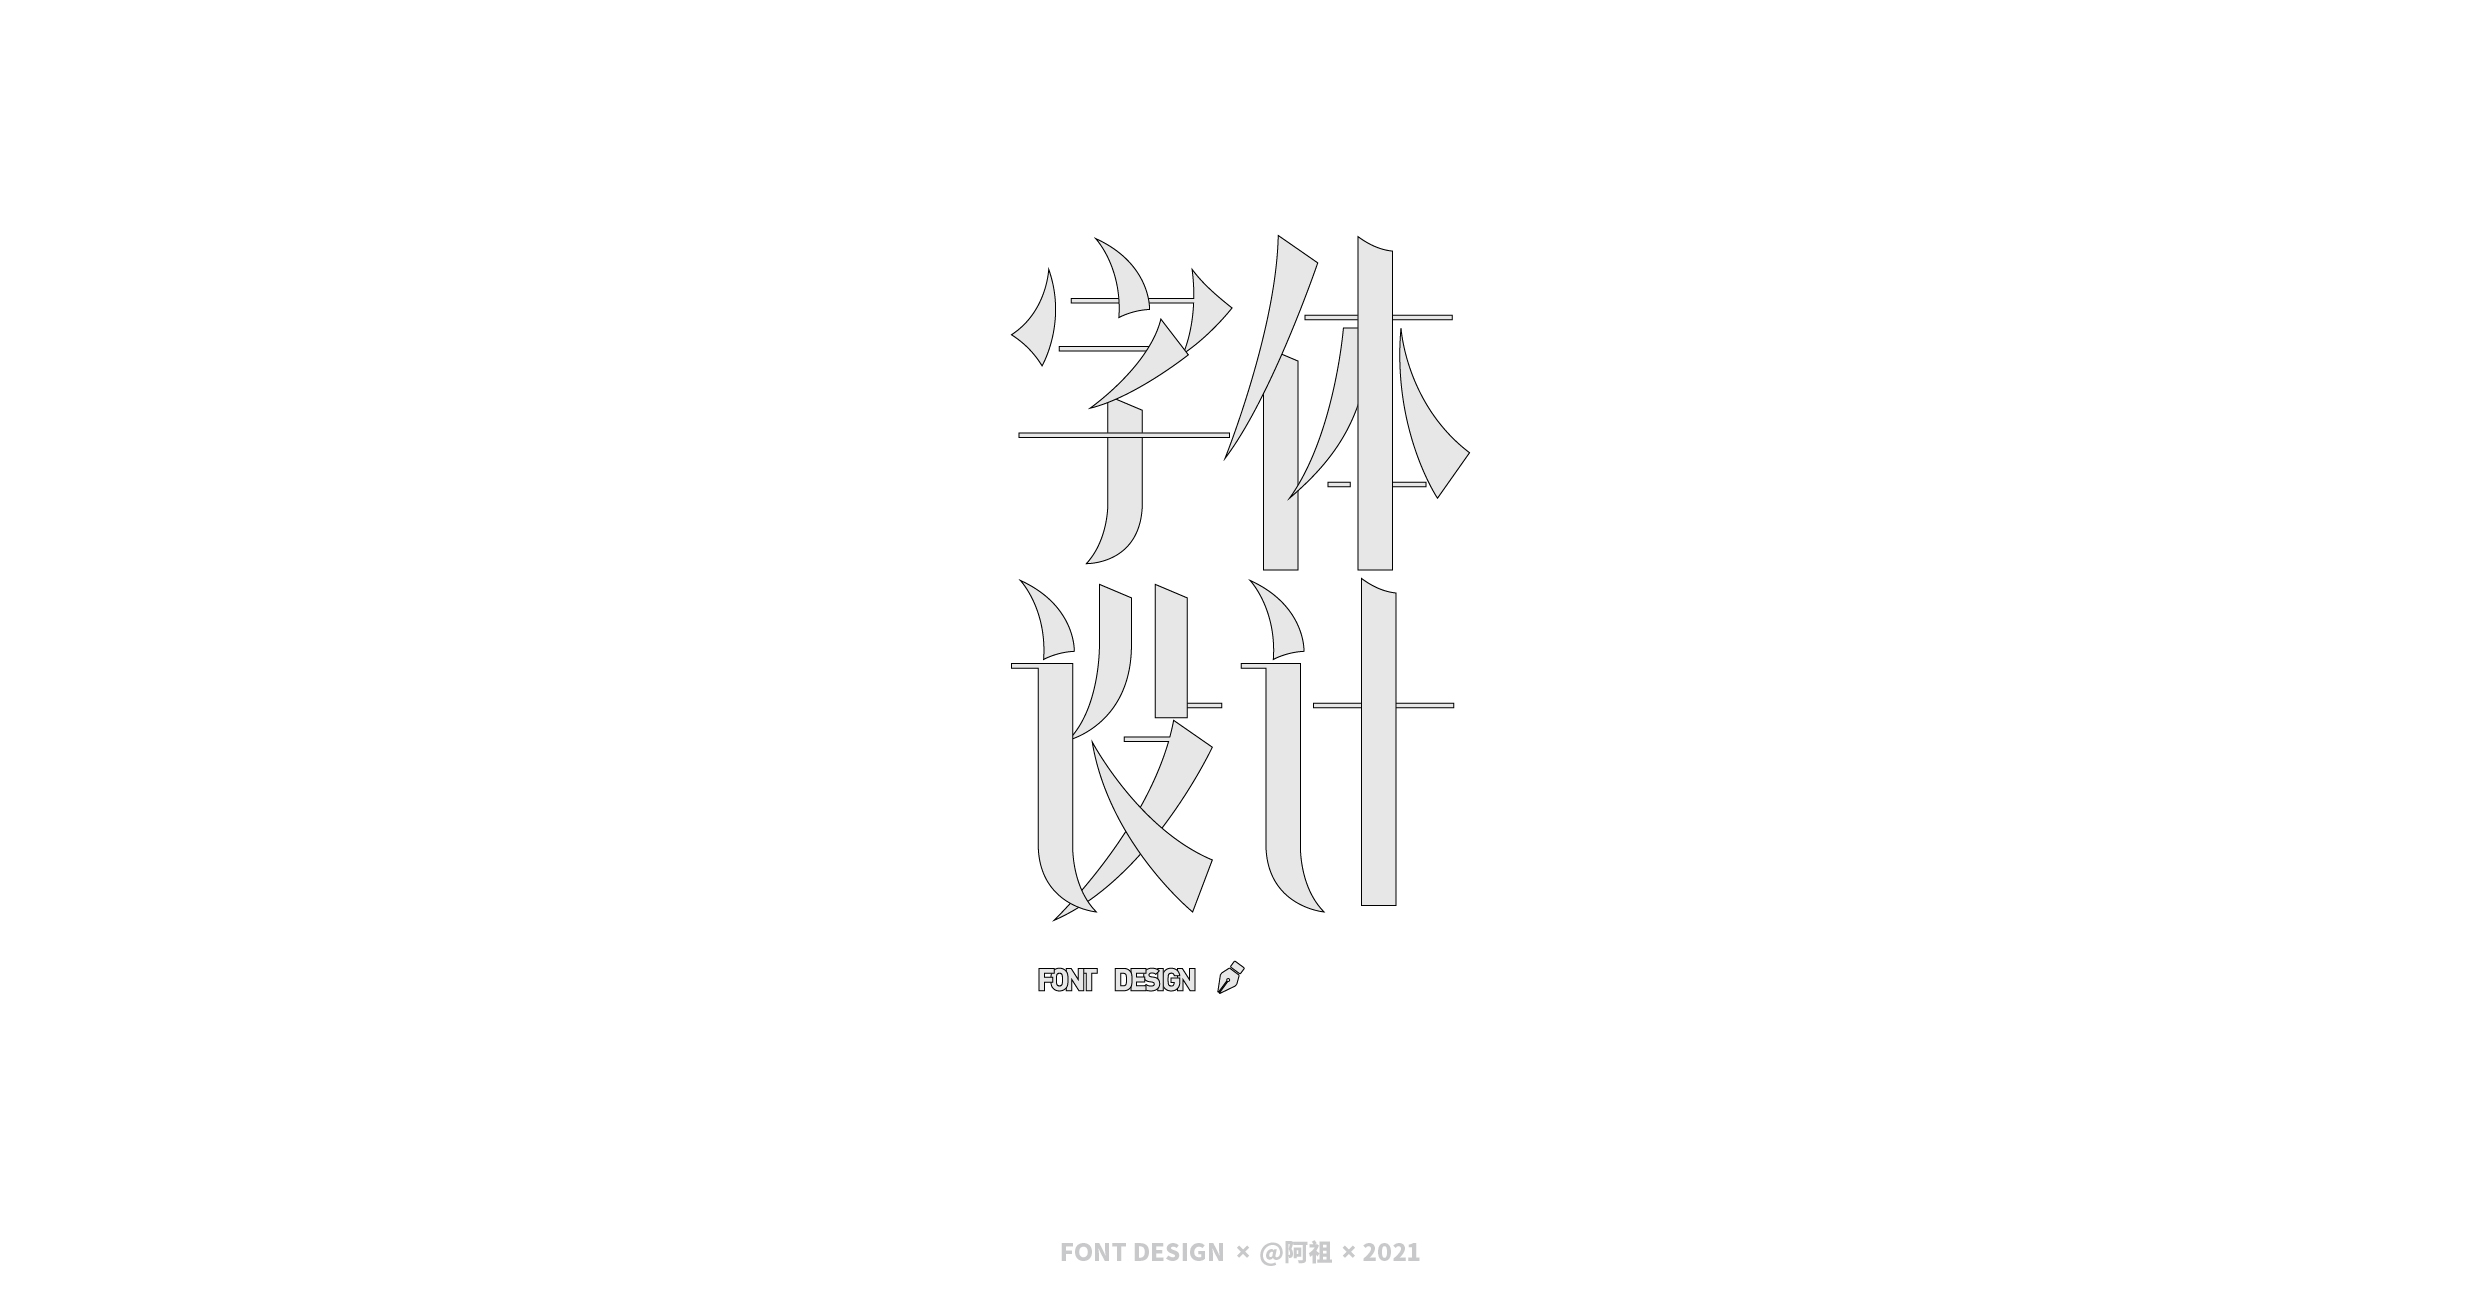 27P Collection of the latest Chinese font design schemes in 2021 #.48